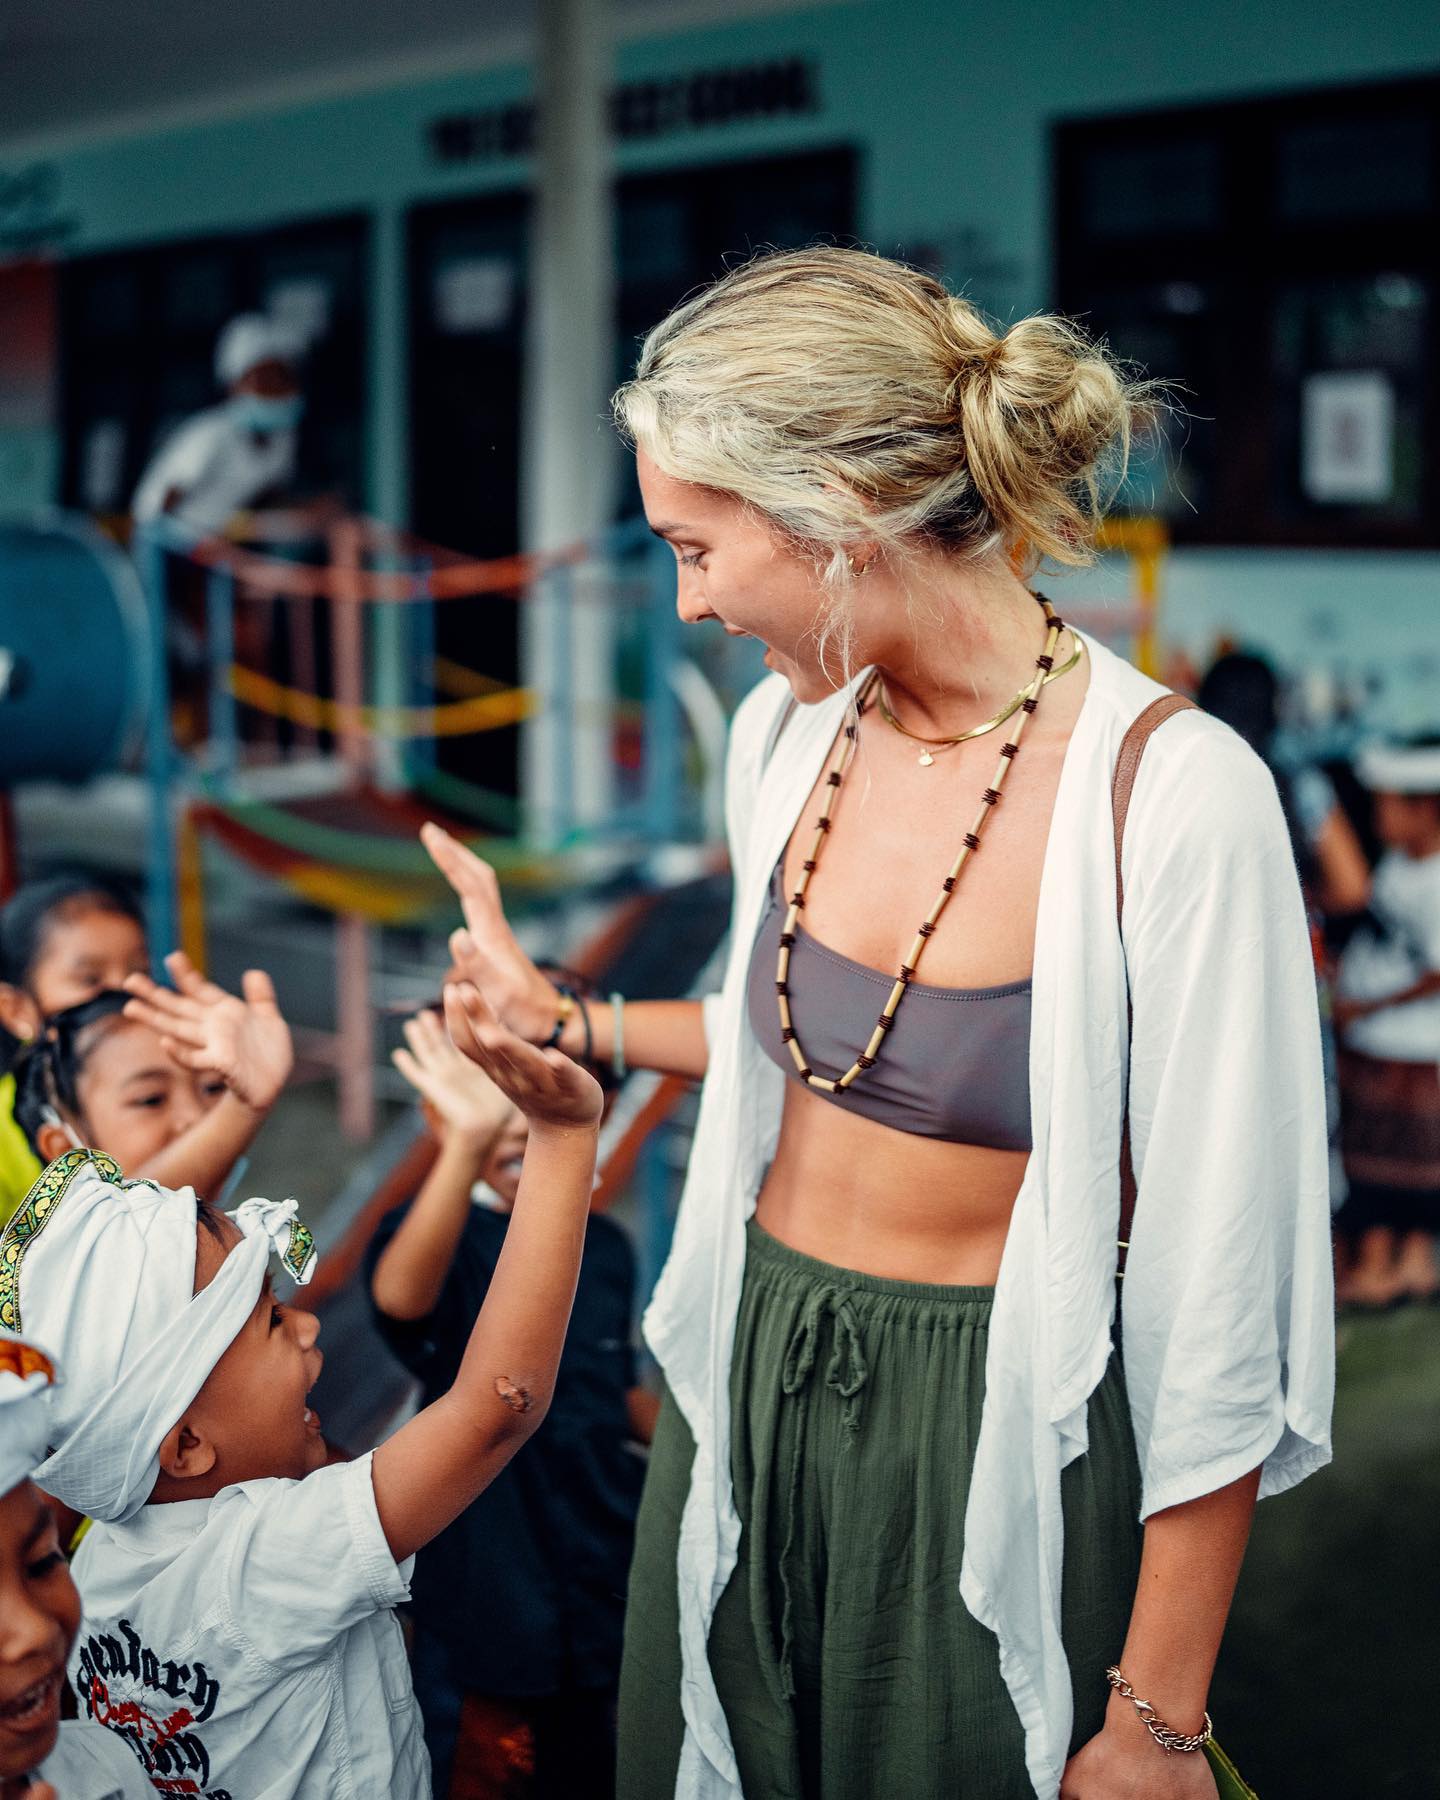 One of my favourite days in Bali so far! It was amazing to see the smiles of these kids, knowing that they can now go to school because of @karmagawa! Sharing this experience with these beautiful kids is something truly special ♥️ #karmagawa